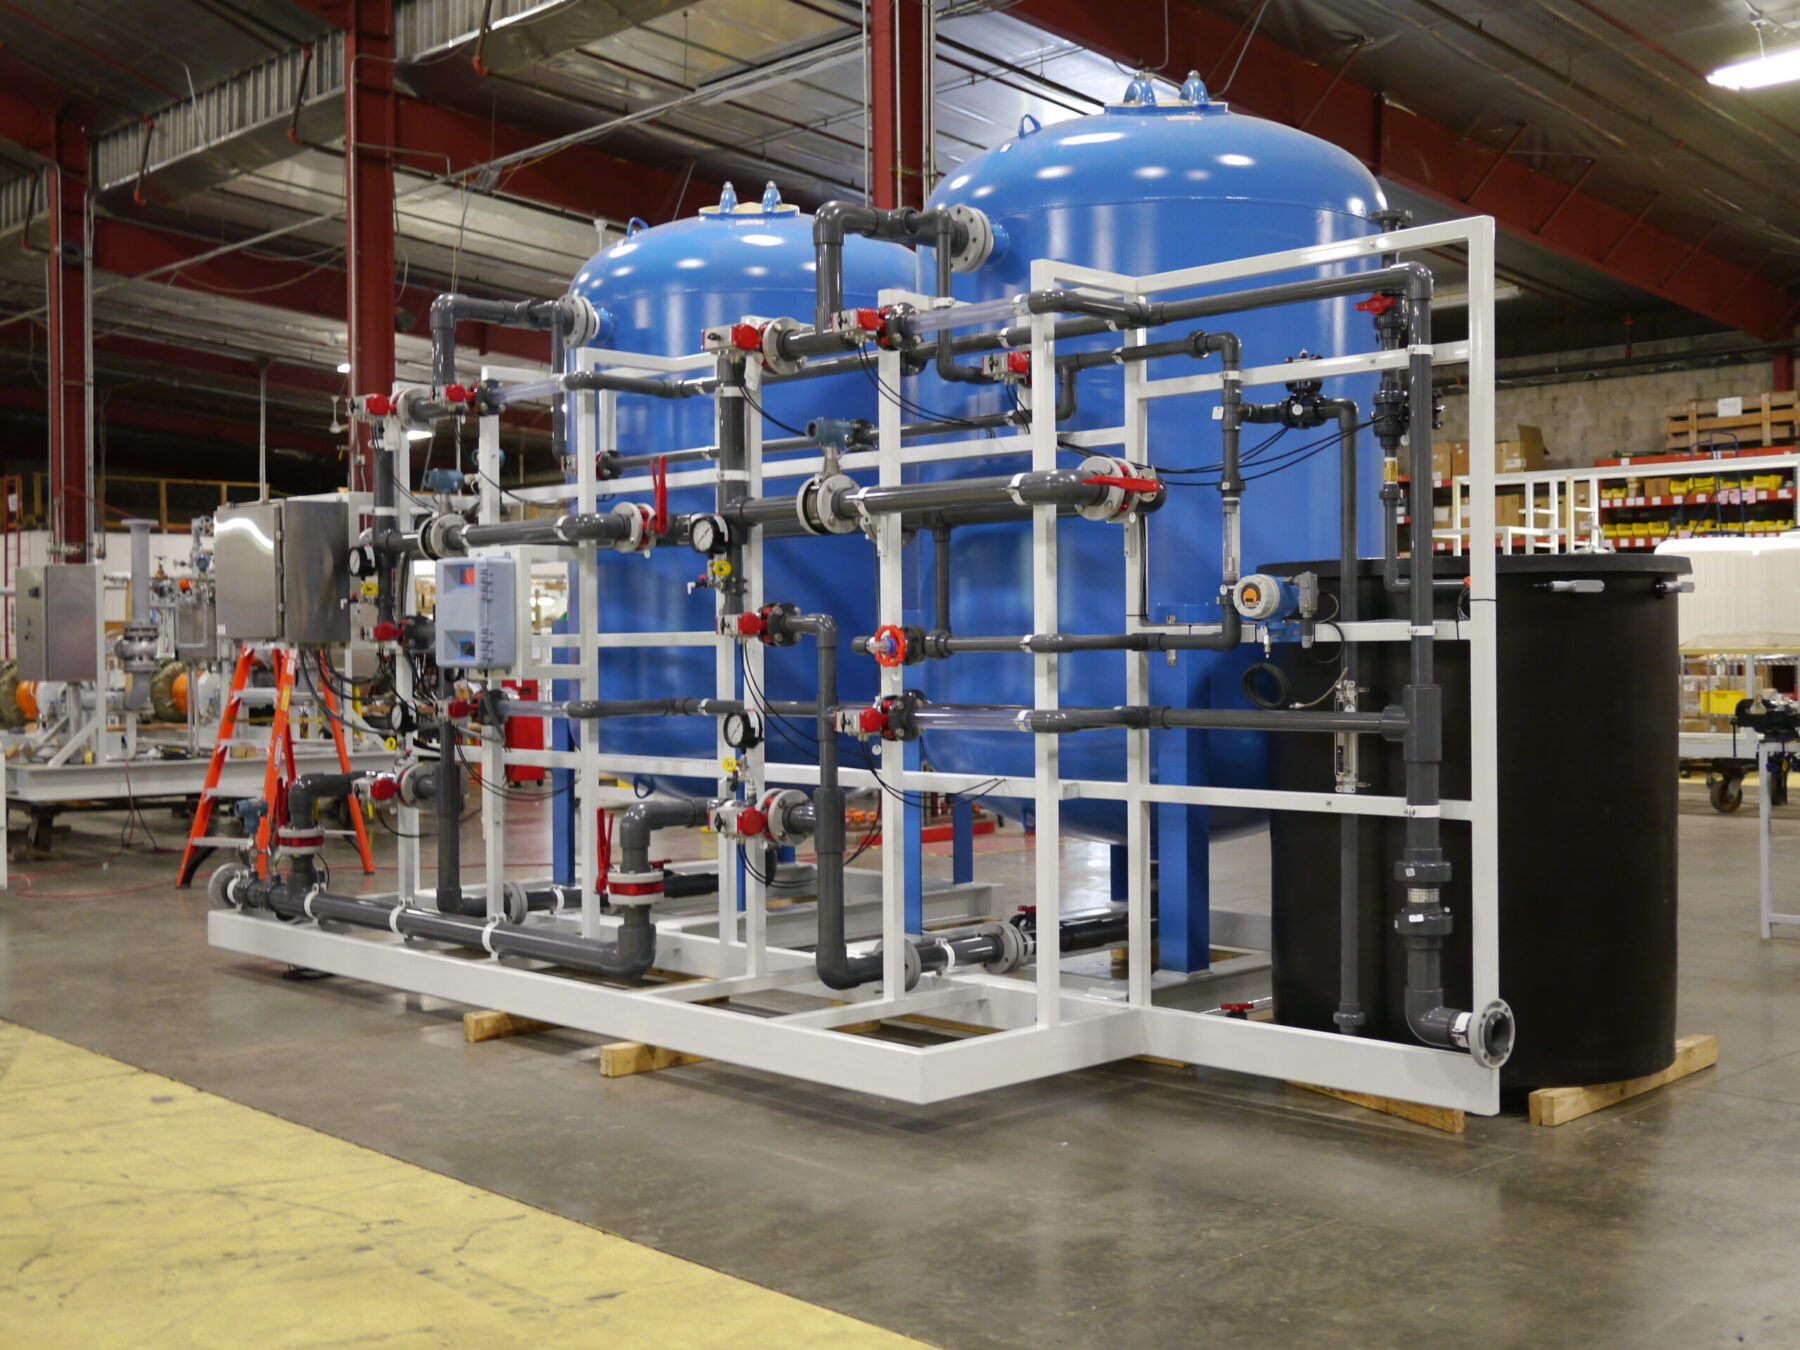 A Cochrane by Newterra water softening system sits in an industrial warehouse comprised of a black tank connected to two elevated blue vessels, the entire system connected by grey PVC pipes containing valves and other components for regulating the water softening process